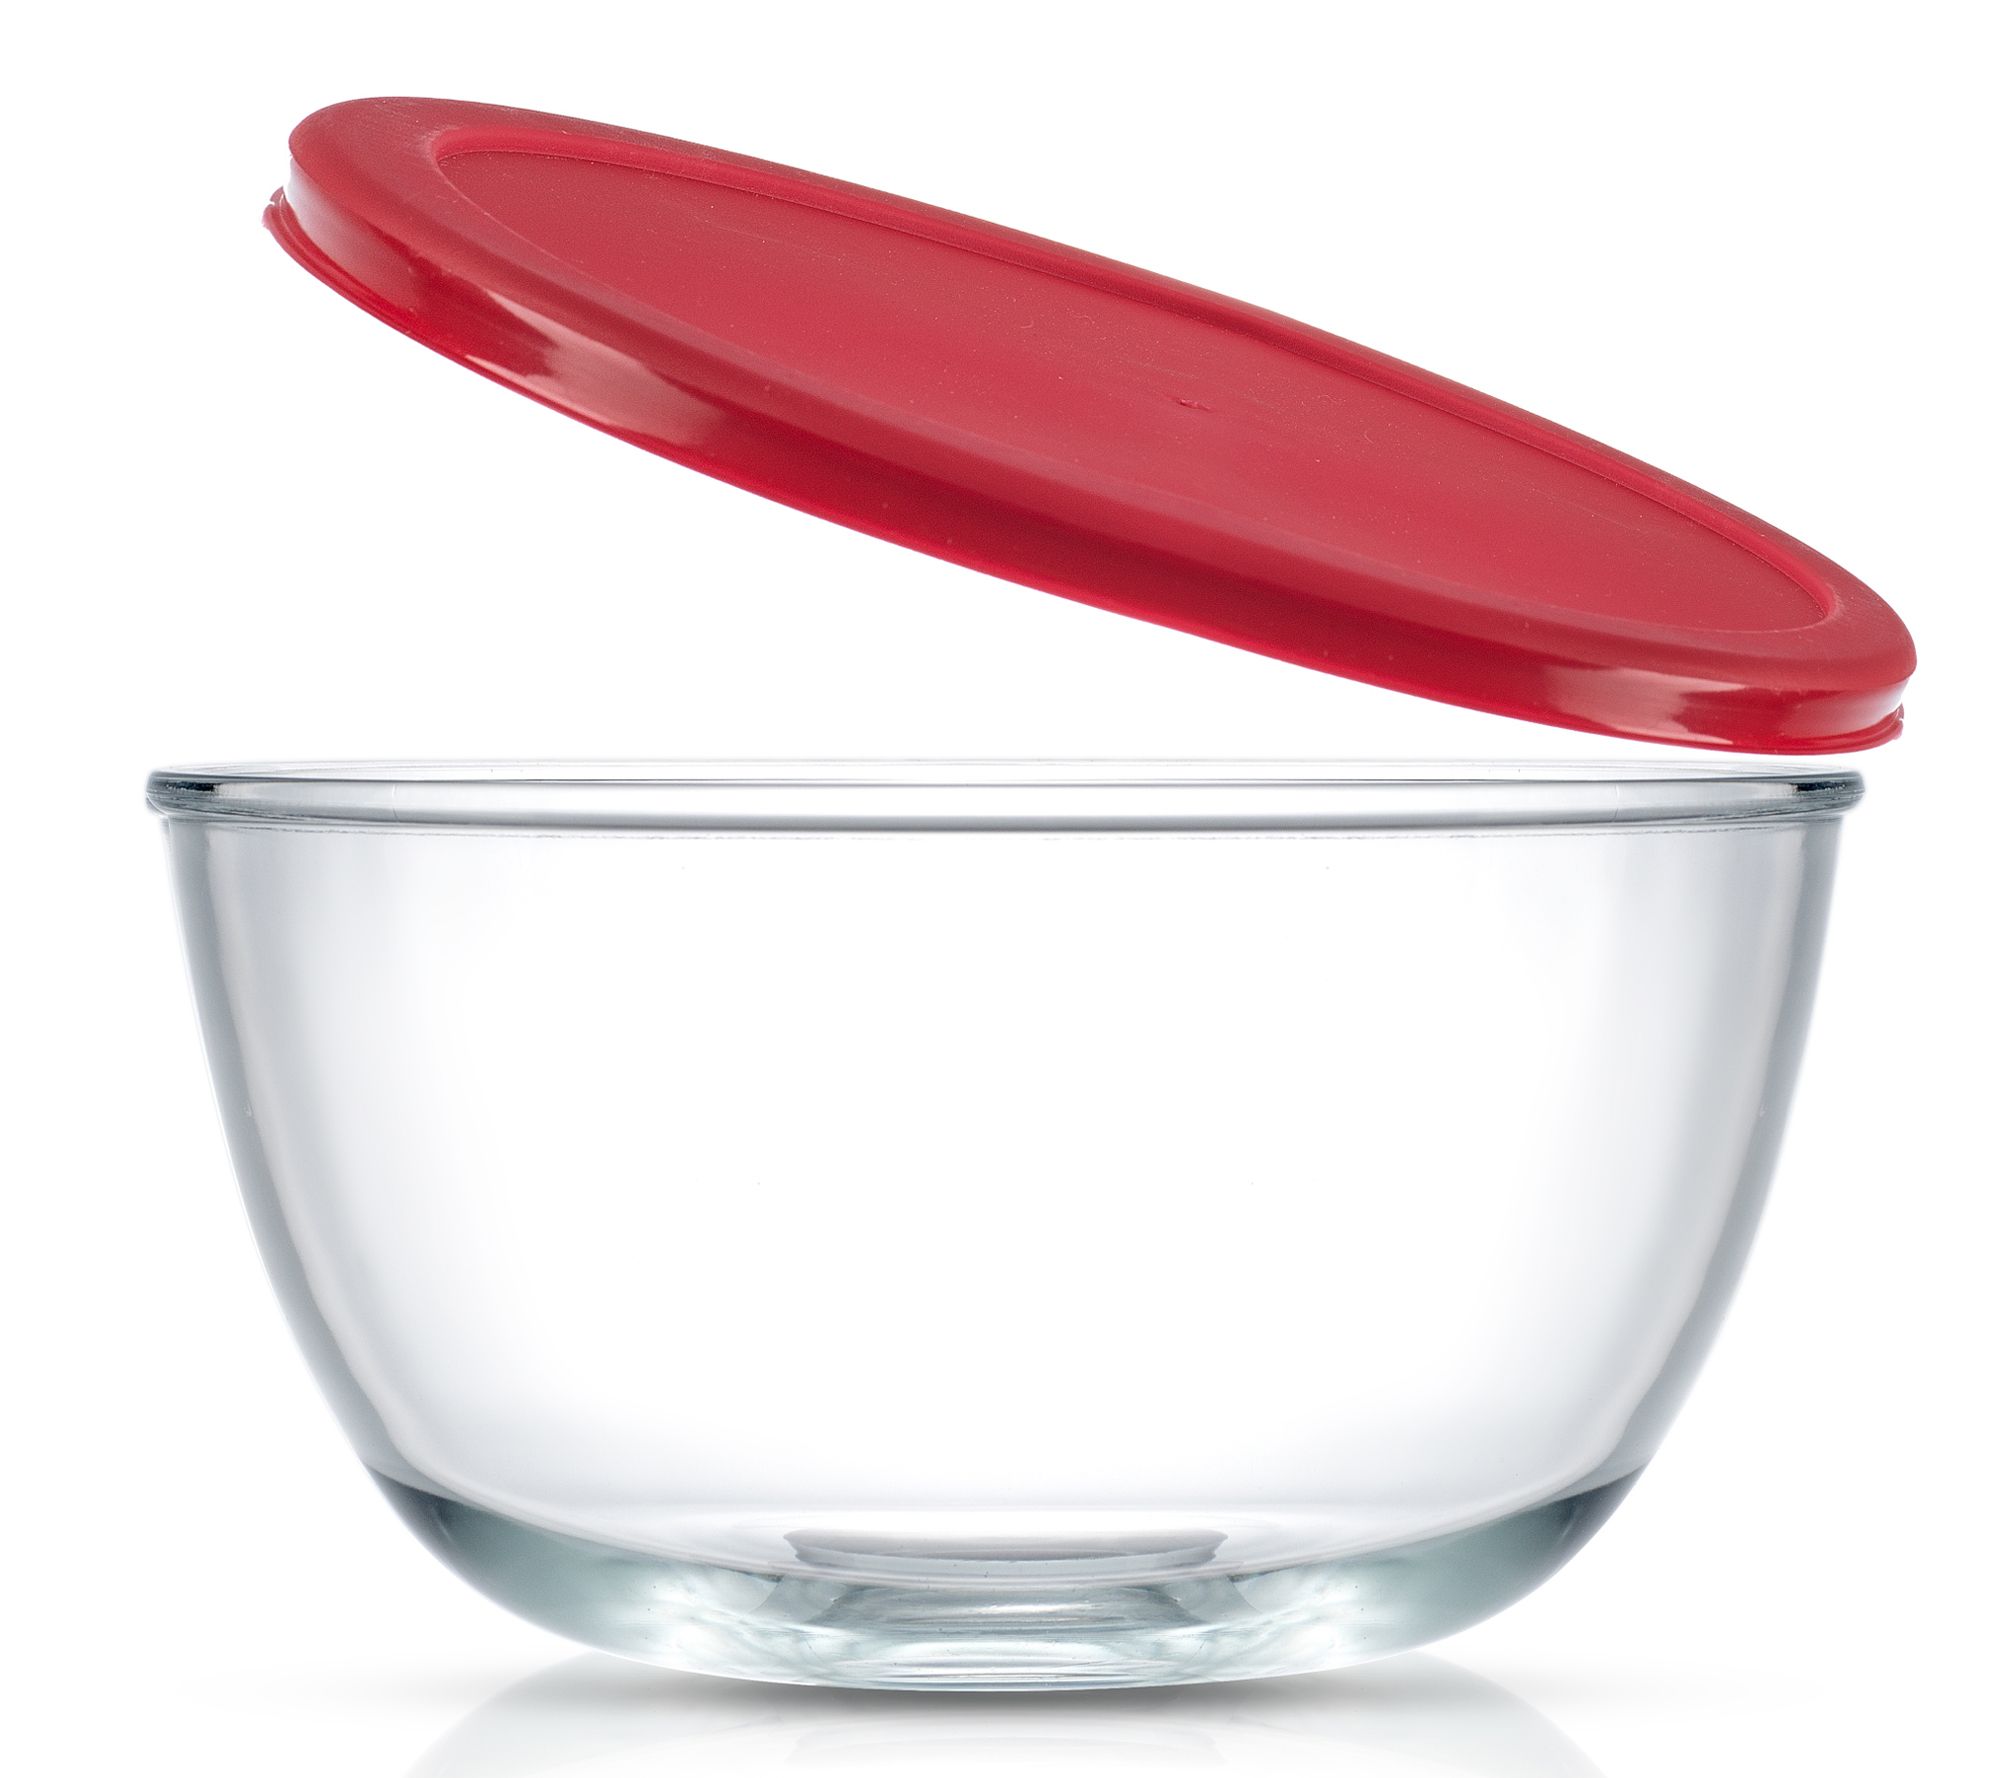 5 Pcs Nested Glass Mixing Bowls Set With Apple Design and Red Lids